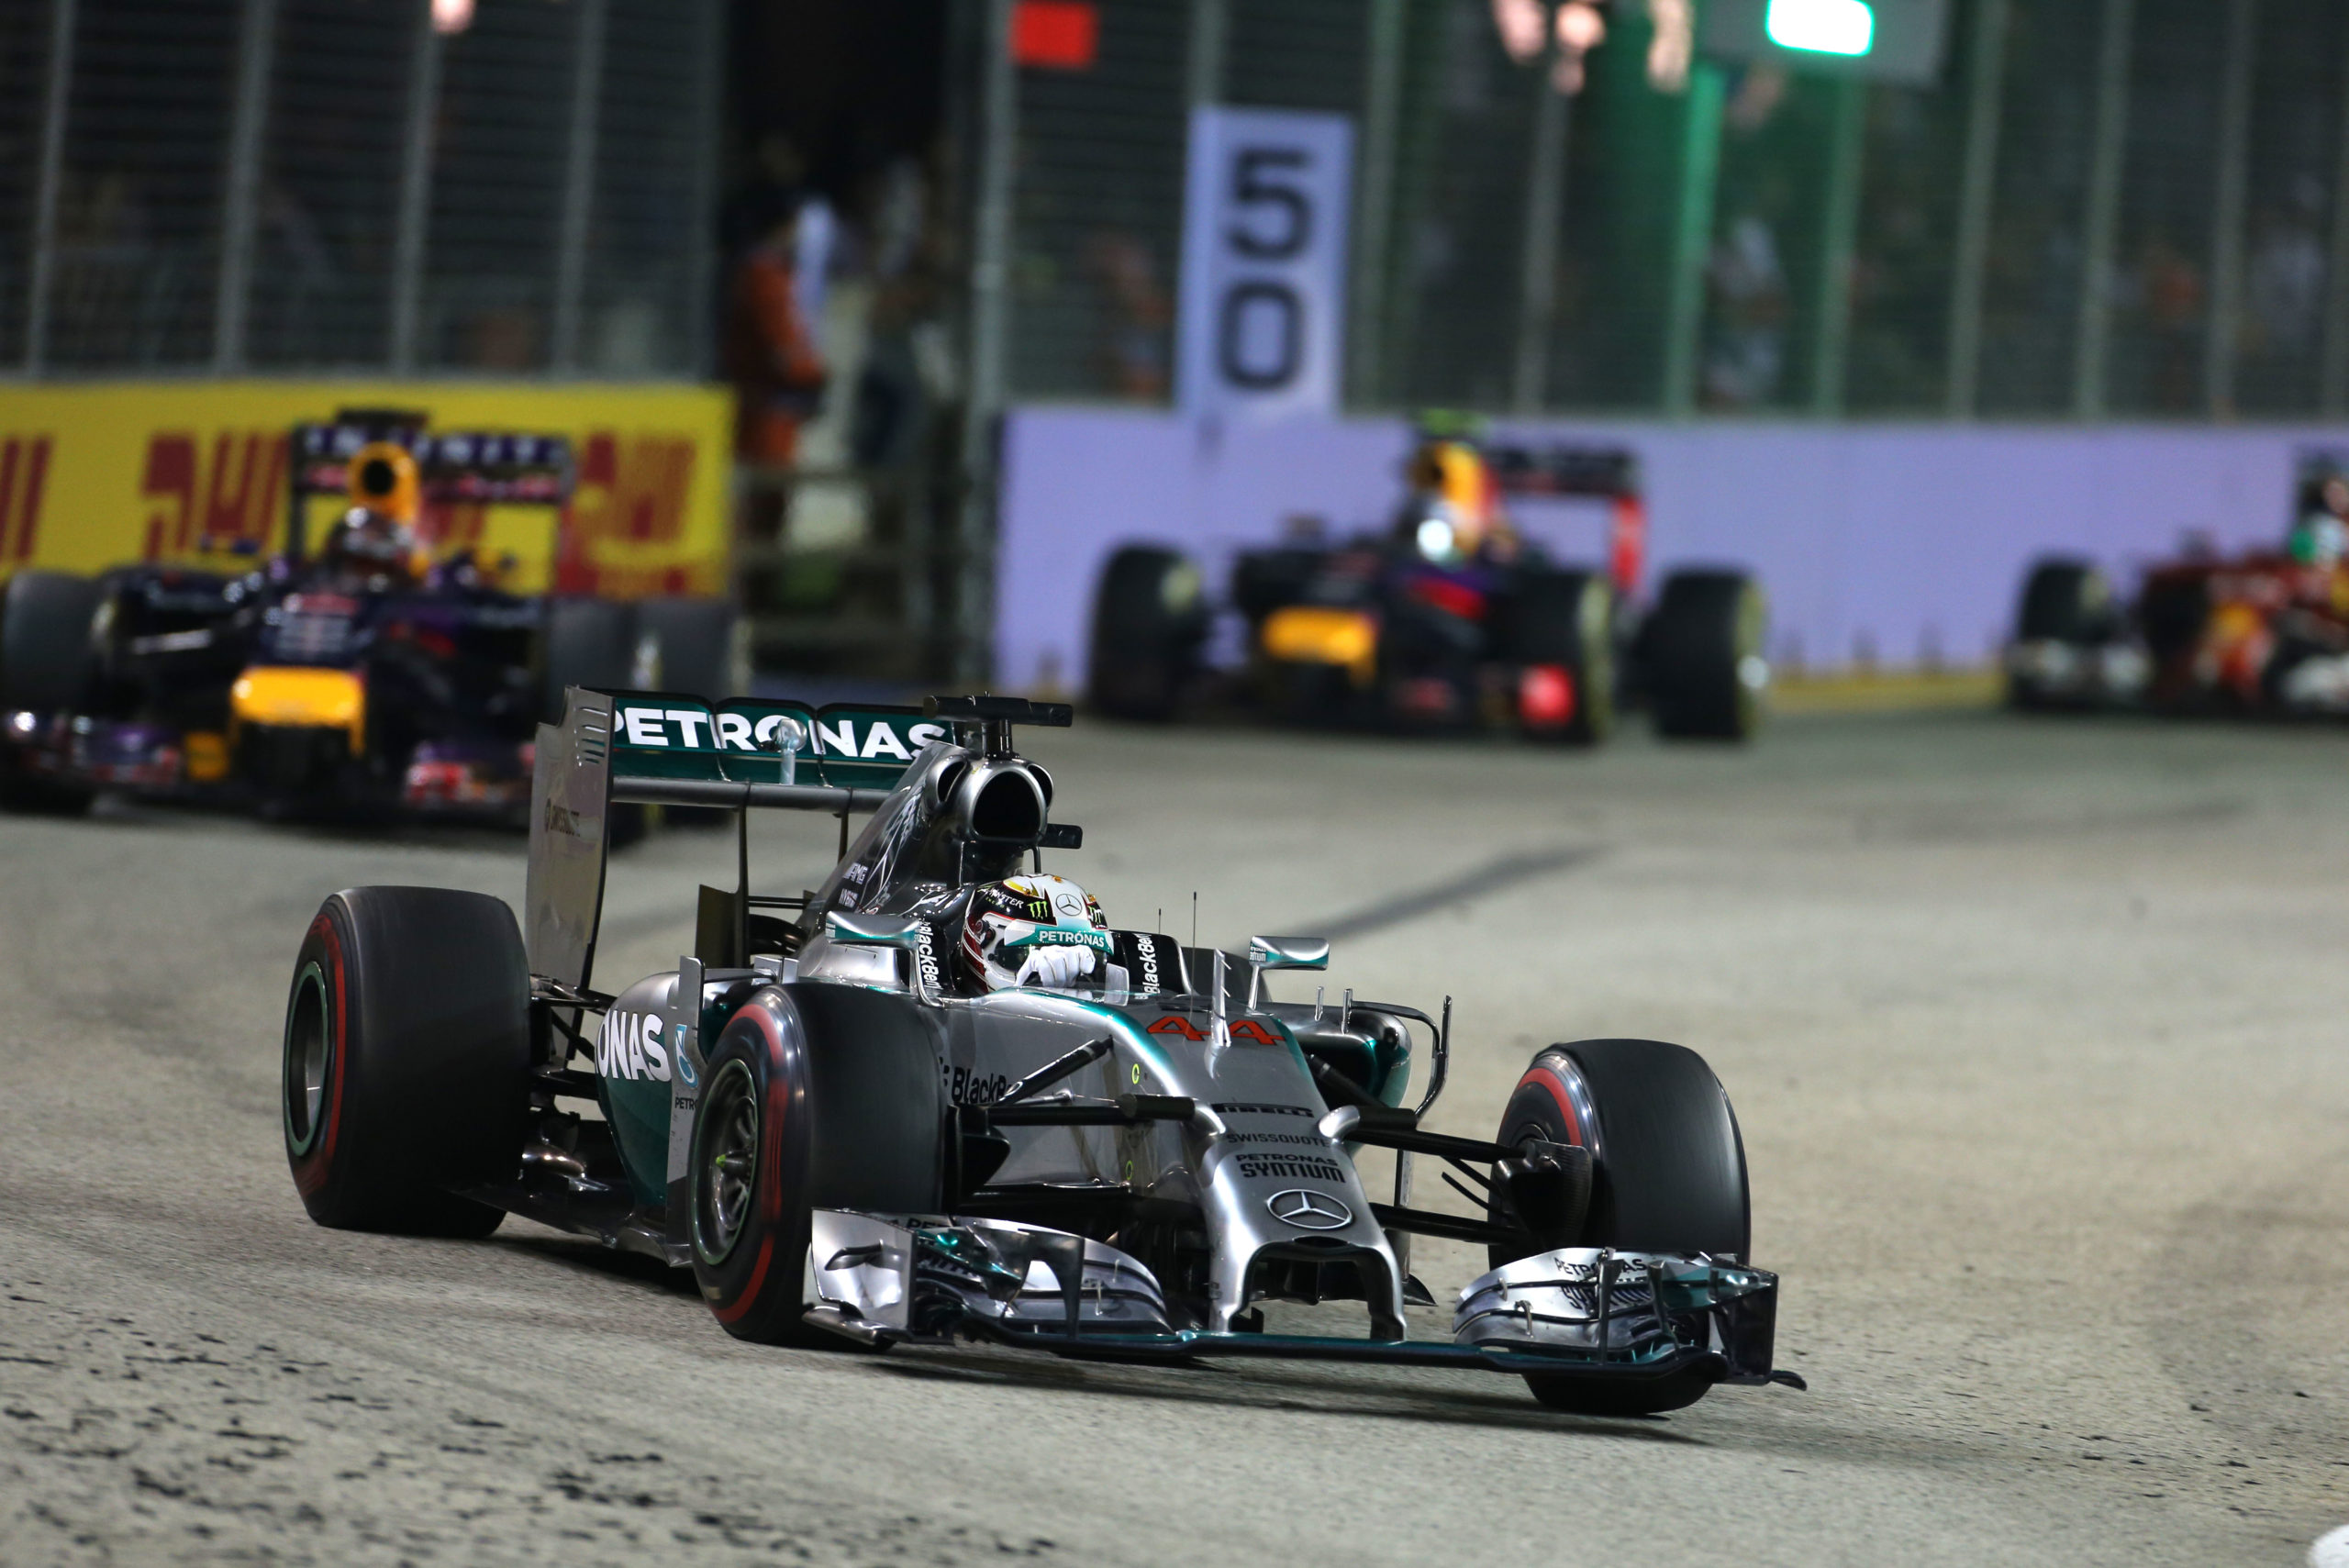 red bull more dominant than mercedes was? hamilton claim tested